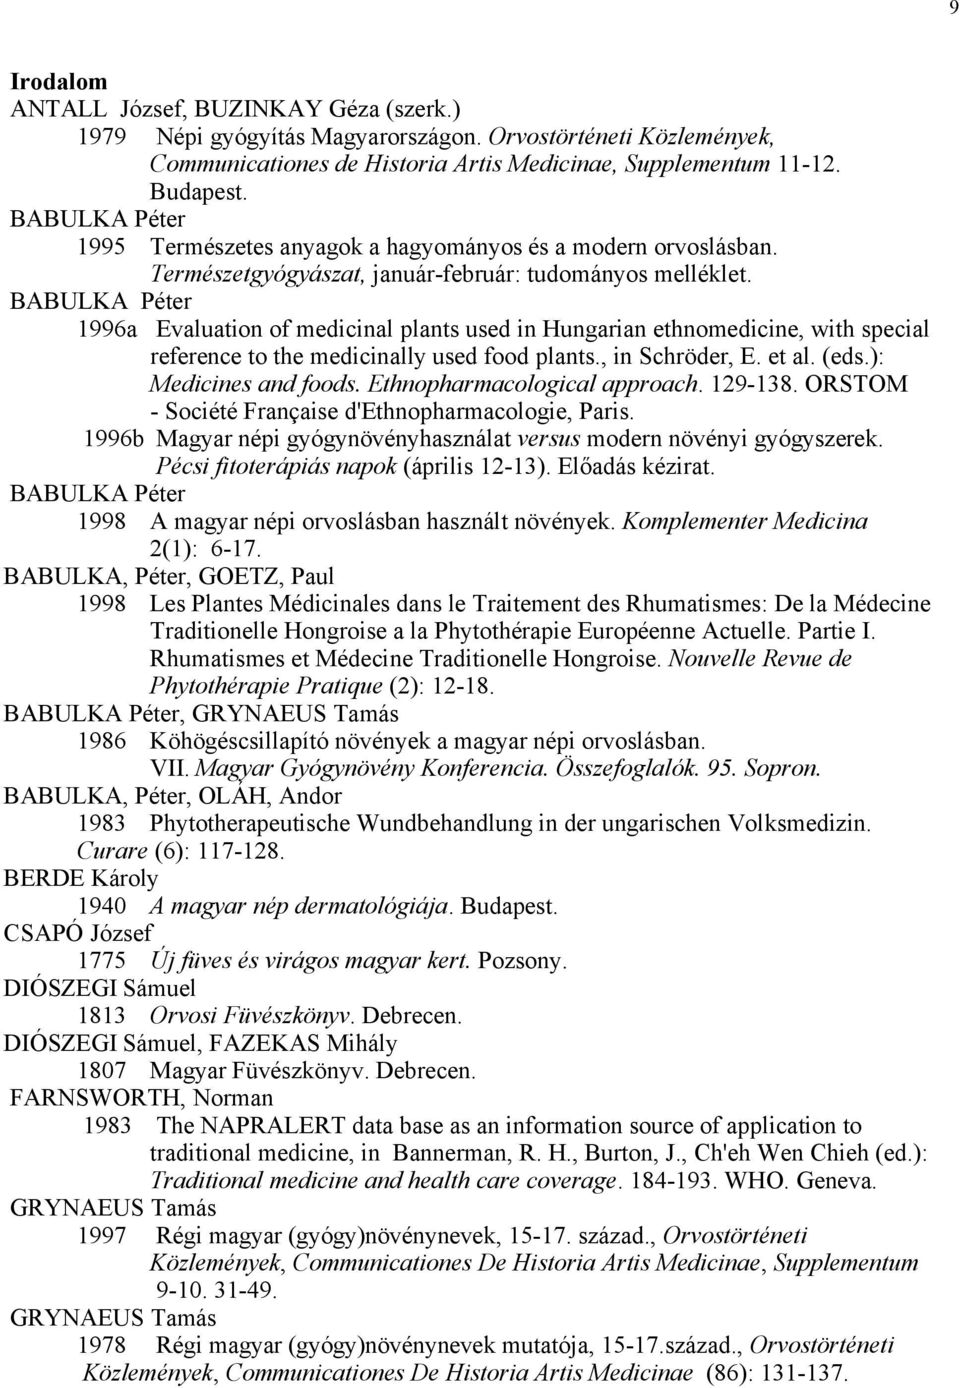 BABULKA Péter 1996a Evaluation of medicinal plants used in Hungarian ethnomedicine, with special reference to the medicinally used food plants., in Schröder, E. et al. (eds.): Medicines and foods.